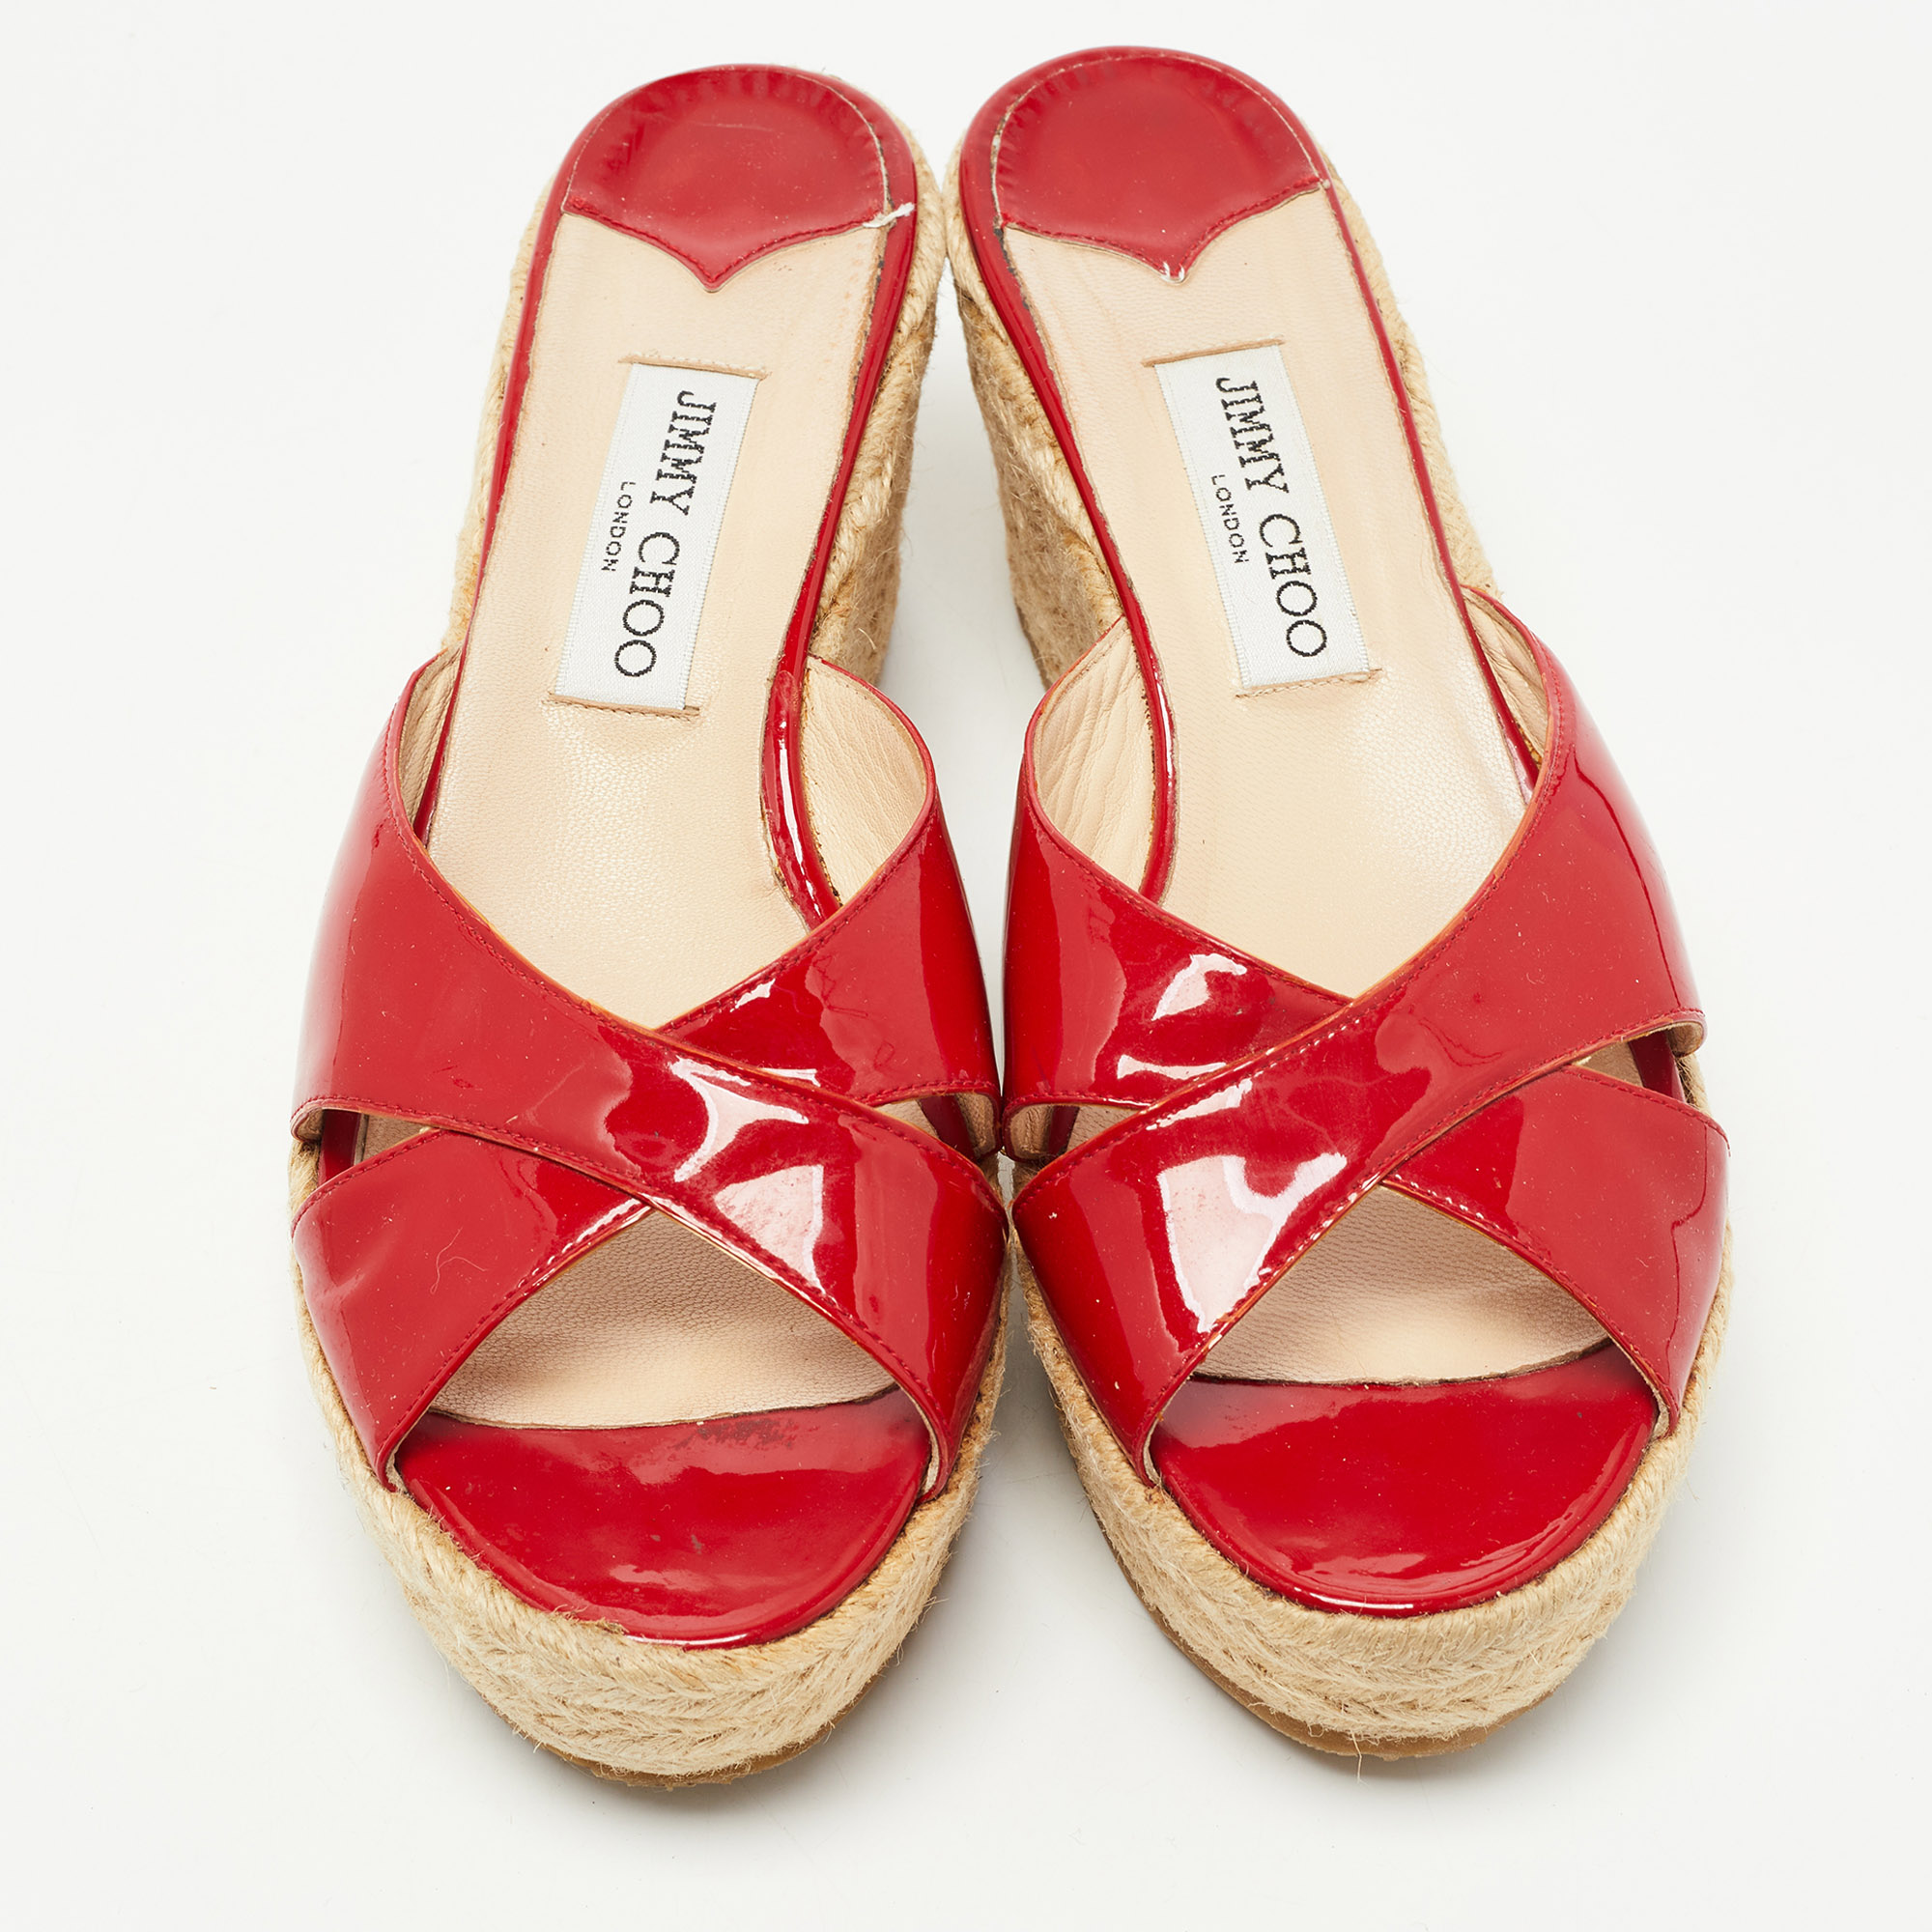 Jimmy Choo Red Patent Leather Prima Wedge Sandals Size 41